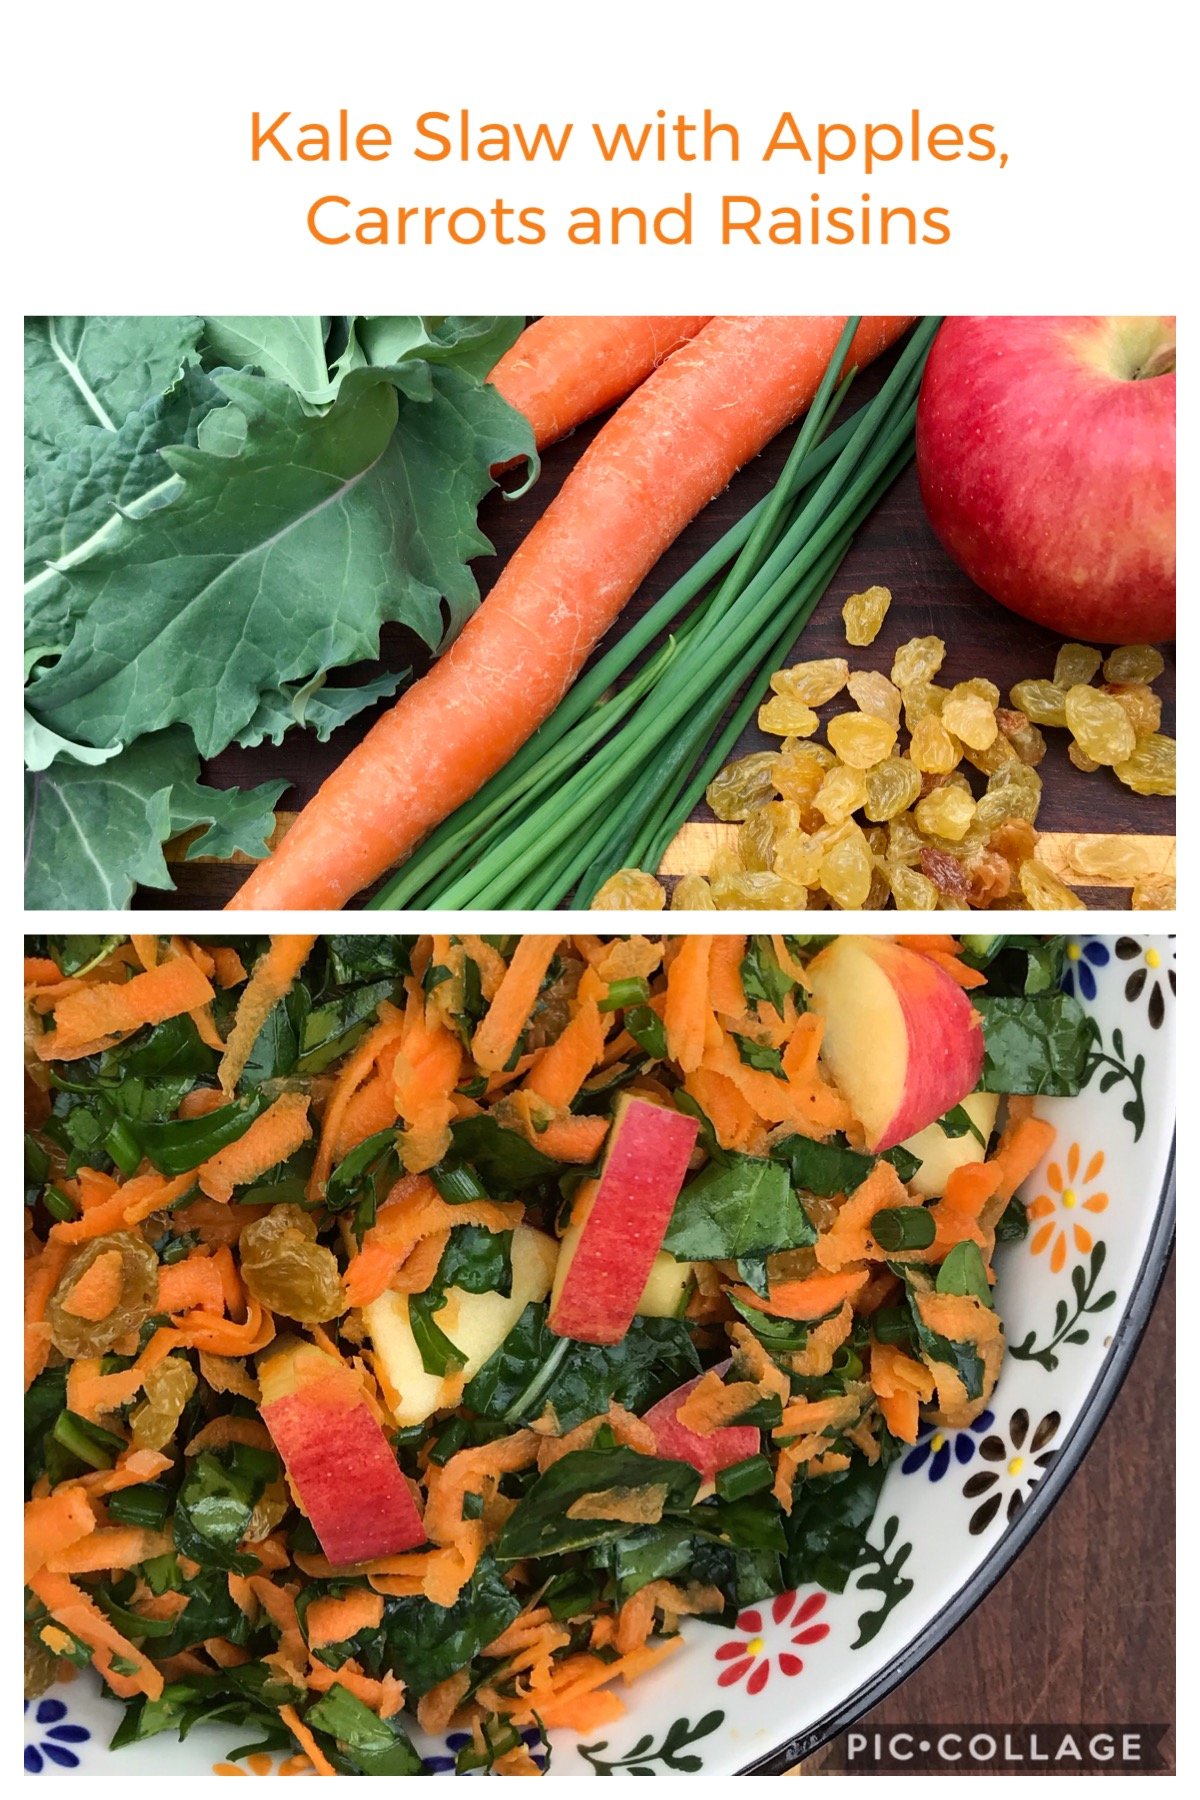 Kale Slaw with Apples, Carrots and Raisins collage